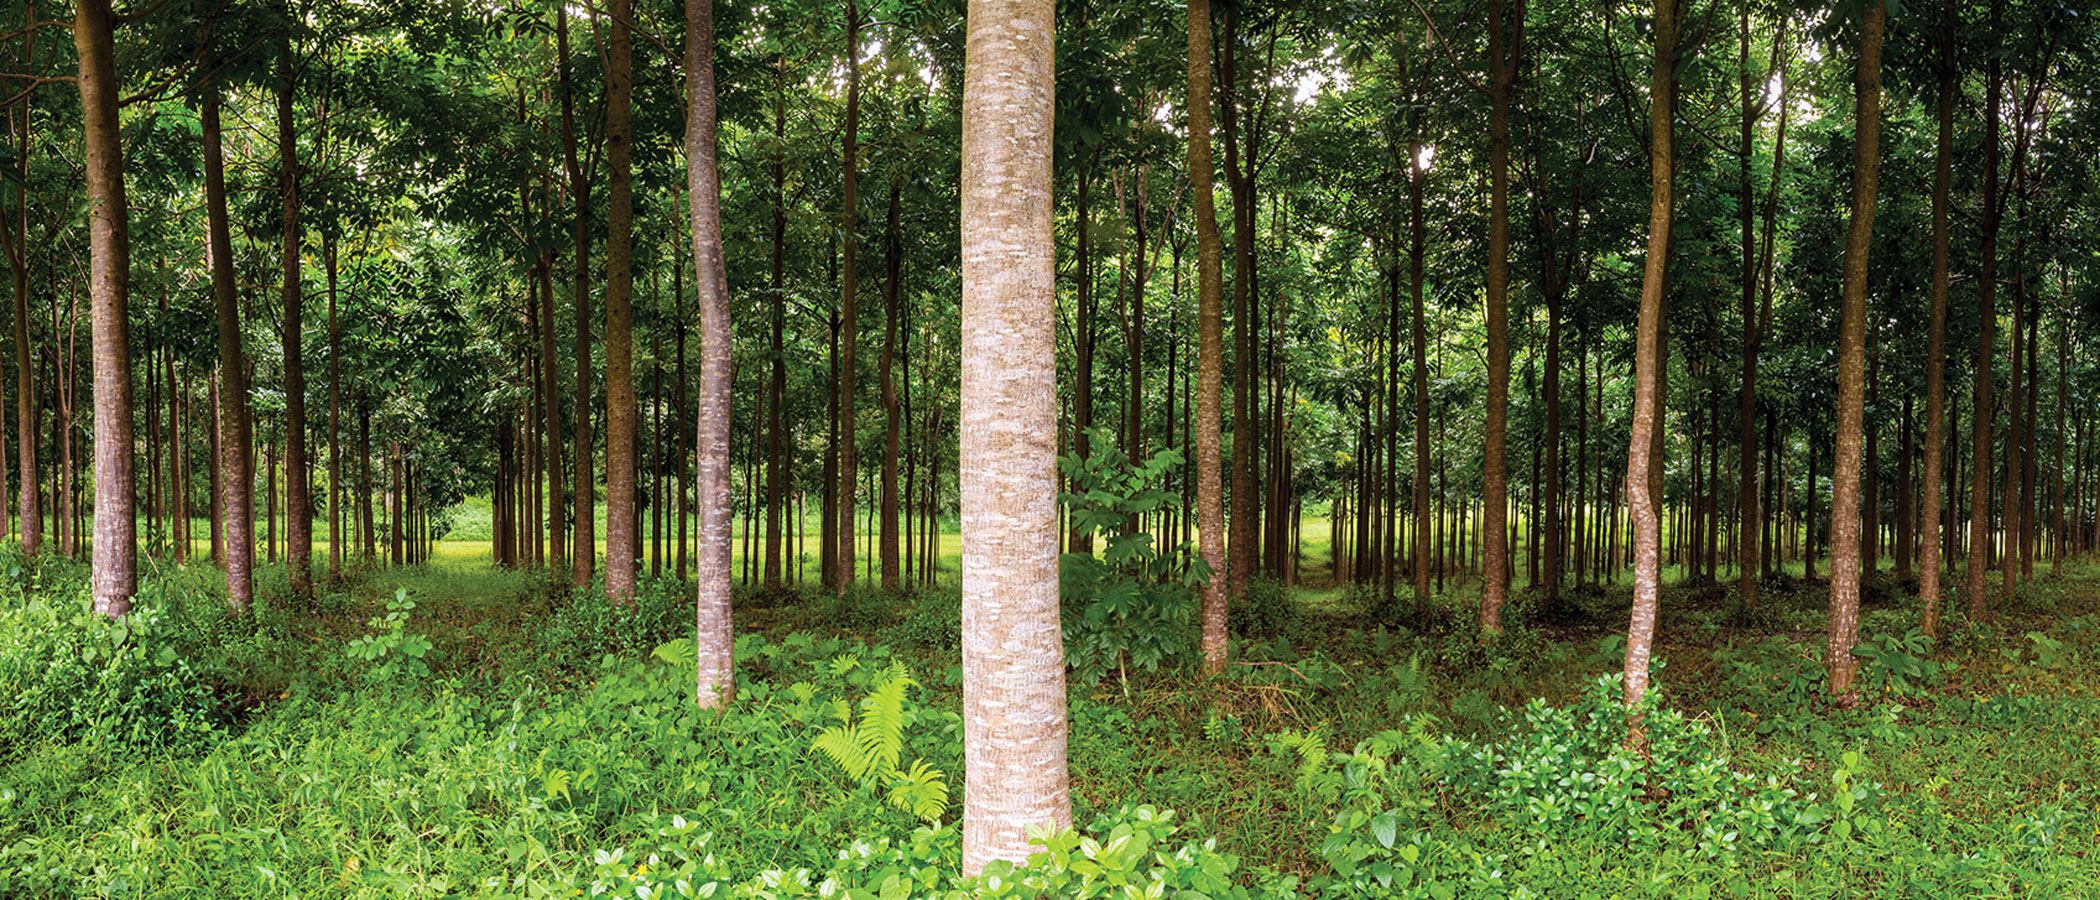 Afforestation - Protecting Our Forest and Future